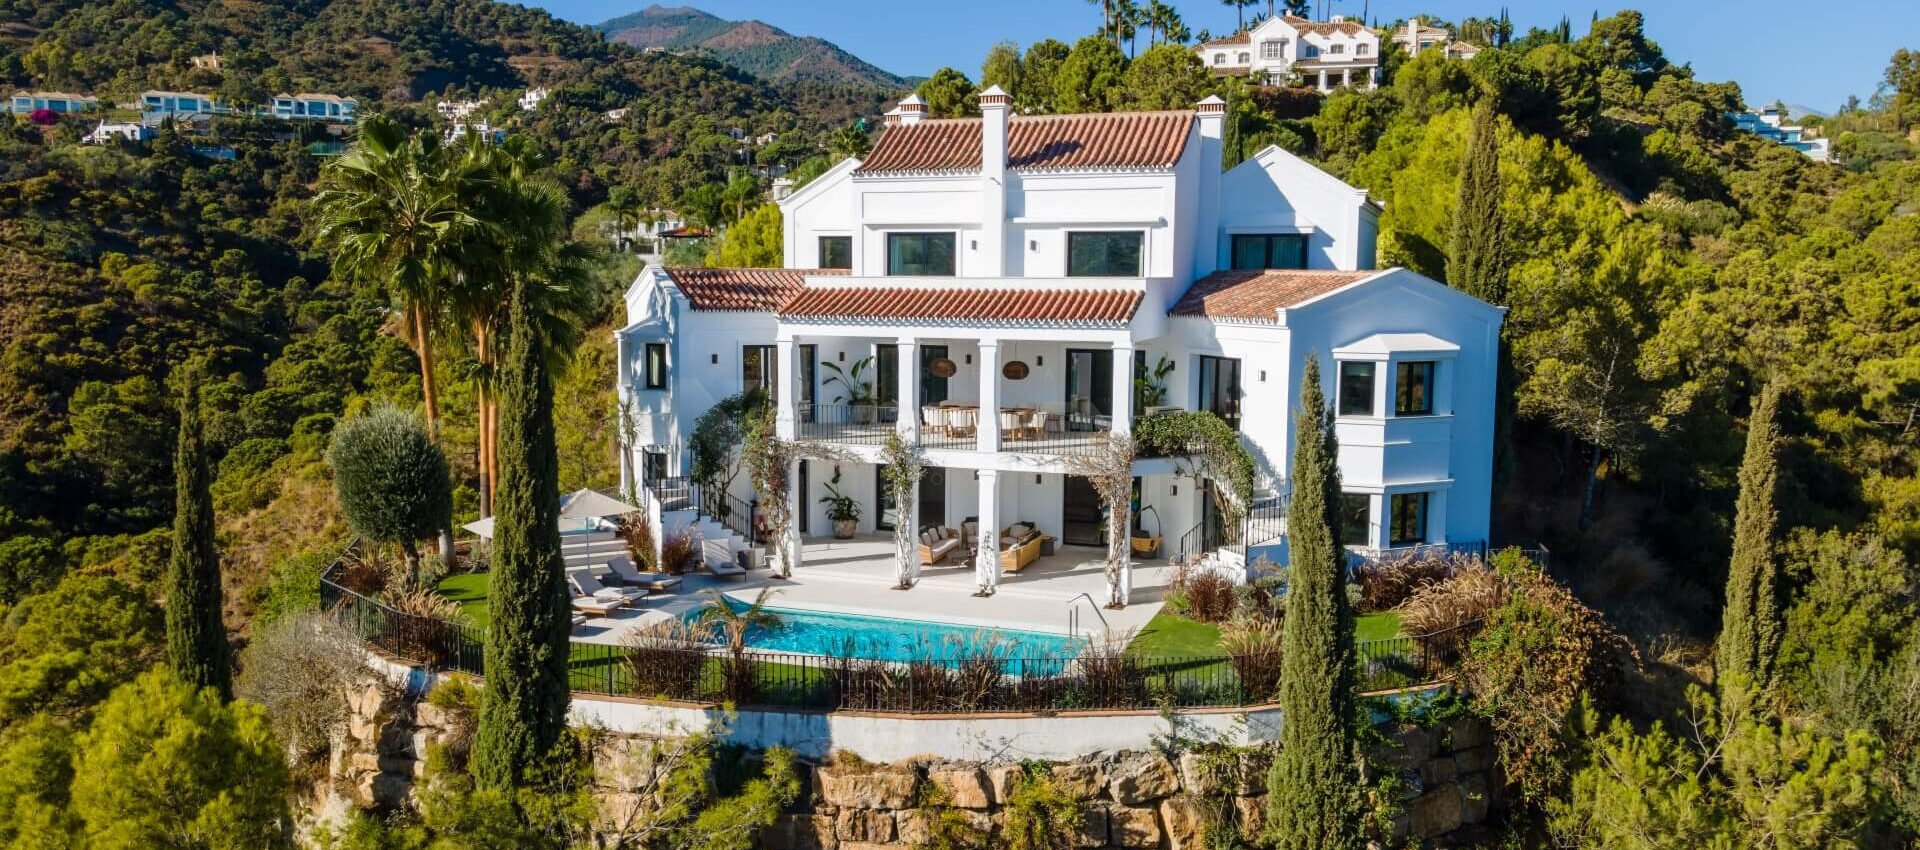 An elegant Andalusian mansion with amazing sea views on the hillside of El Madroñal